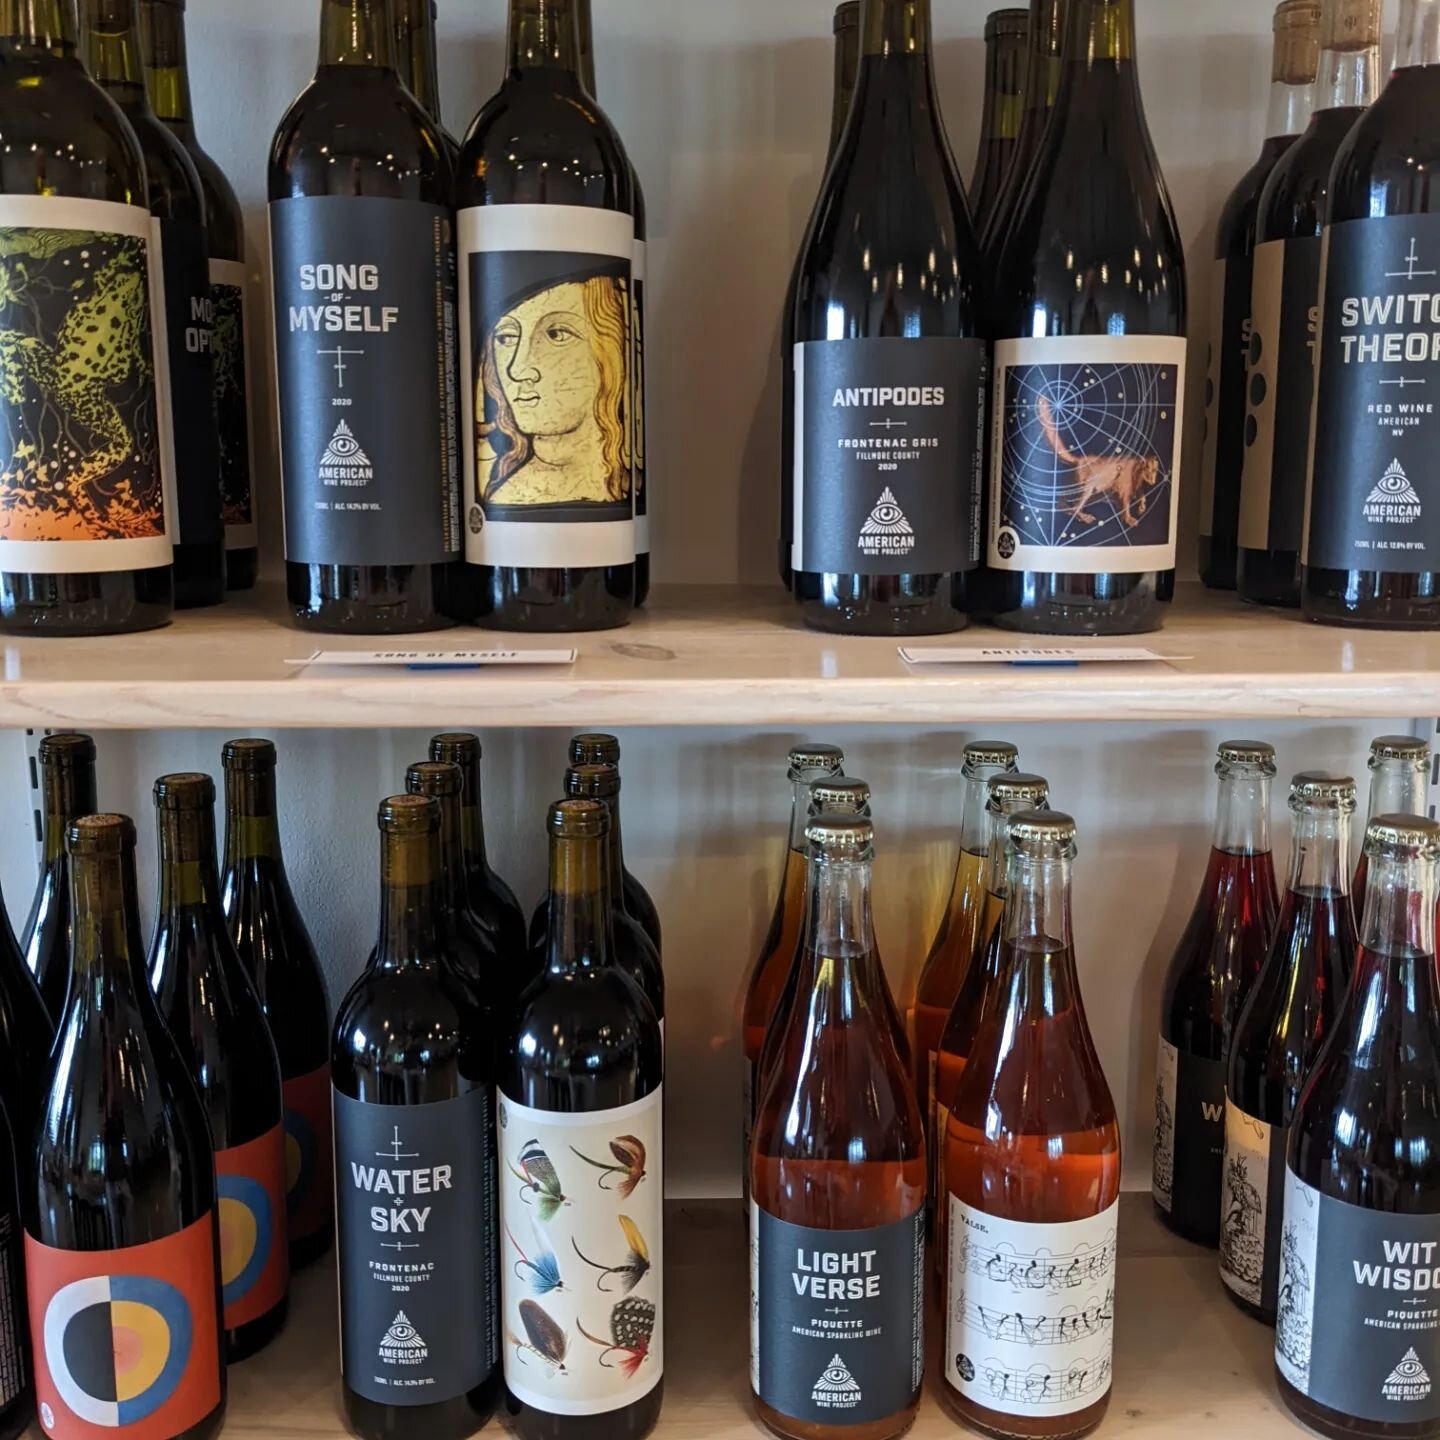 Had a blast going to @americanwineproject yesterday and helping out with the disgorging the new vintage of &quot;We are all made of dreams&quot; pet-nat. So much fun to hang out and help! #onlythegoodstuff #naturalwineforiowa #americanwineproject